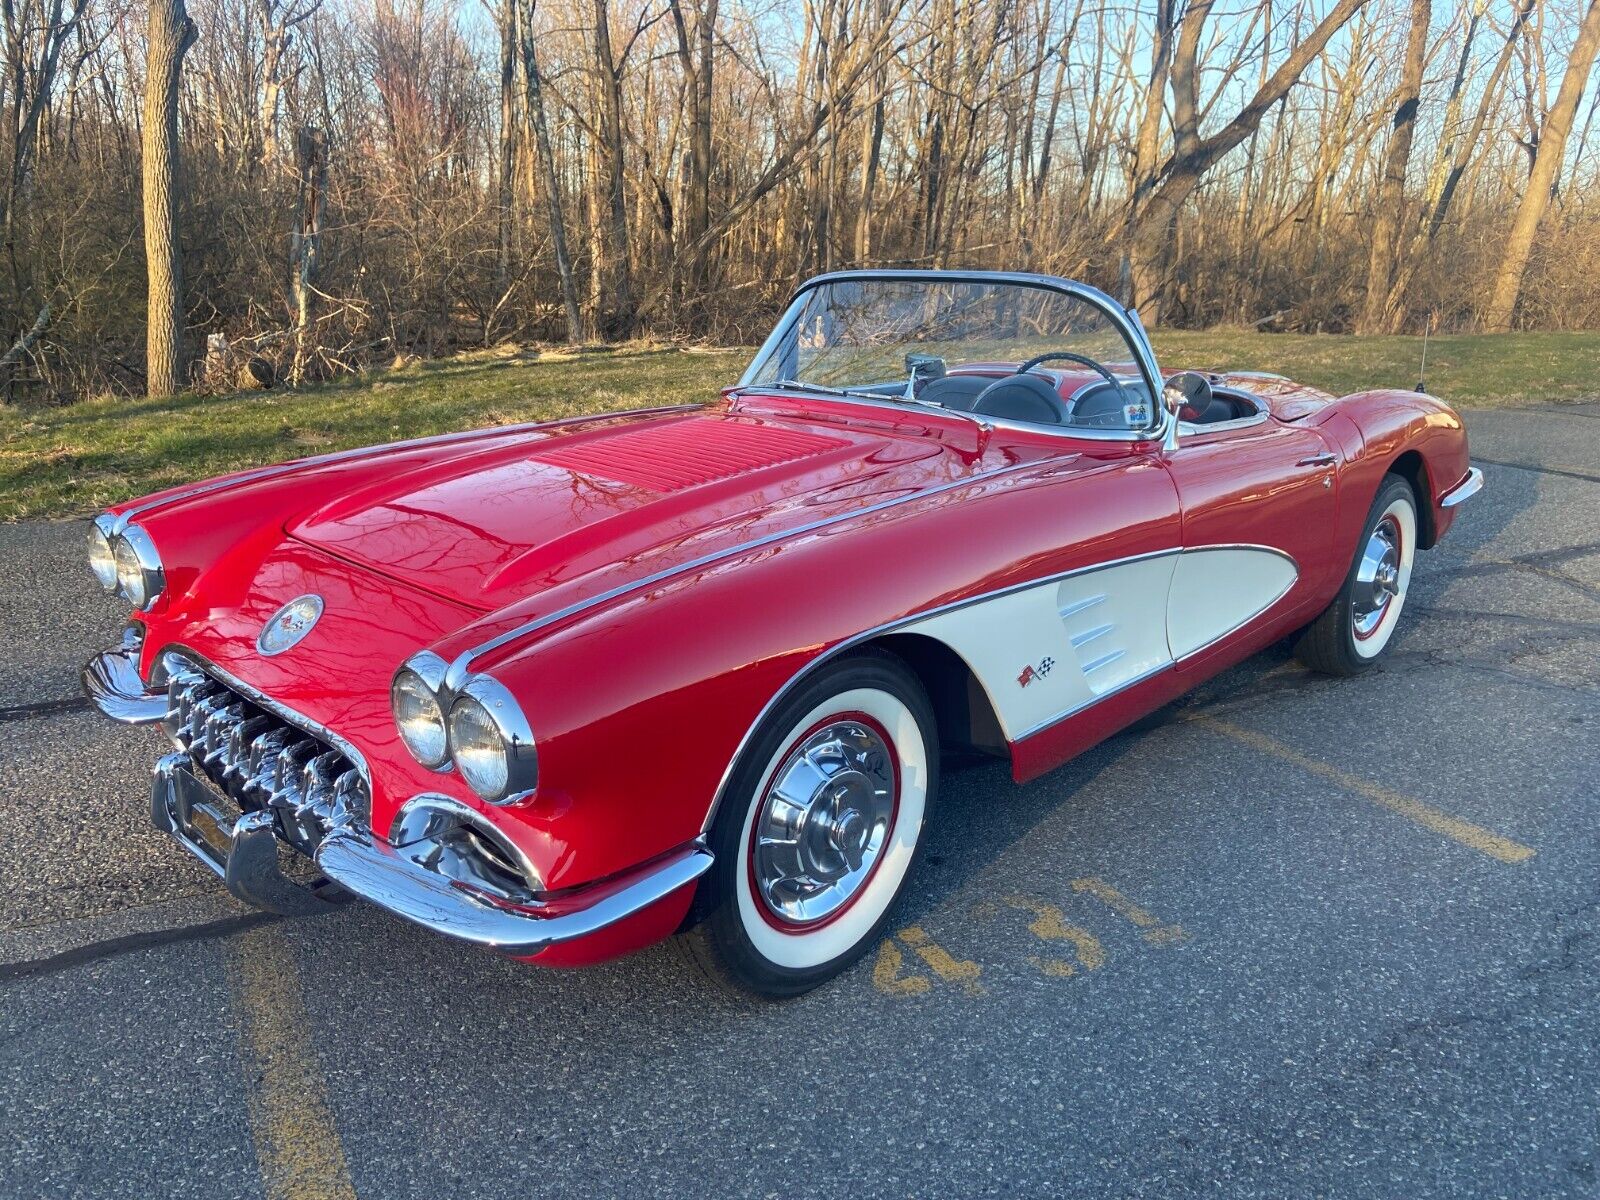 1958 Chevrolet Corvette Roadster Convertible 283 V8 4 Speed Red Beautiful Car GM